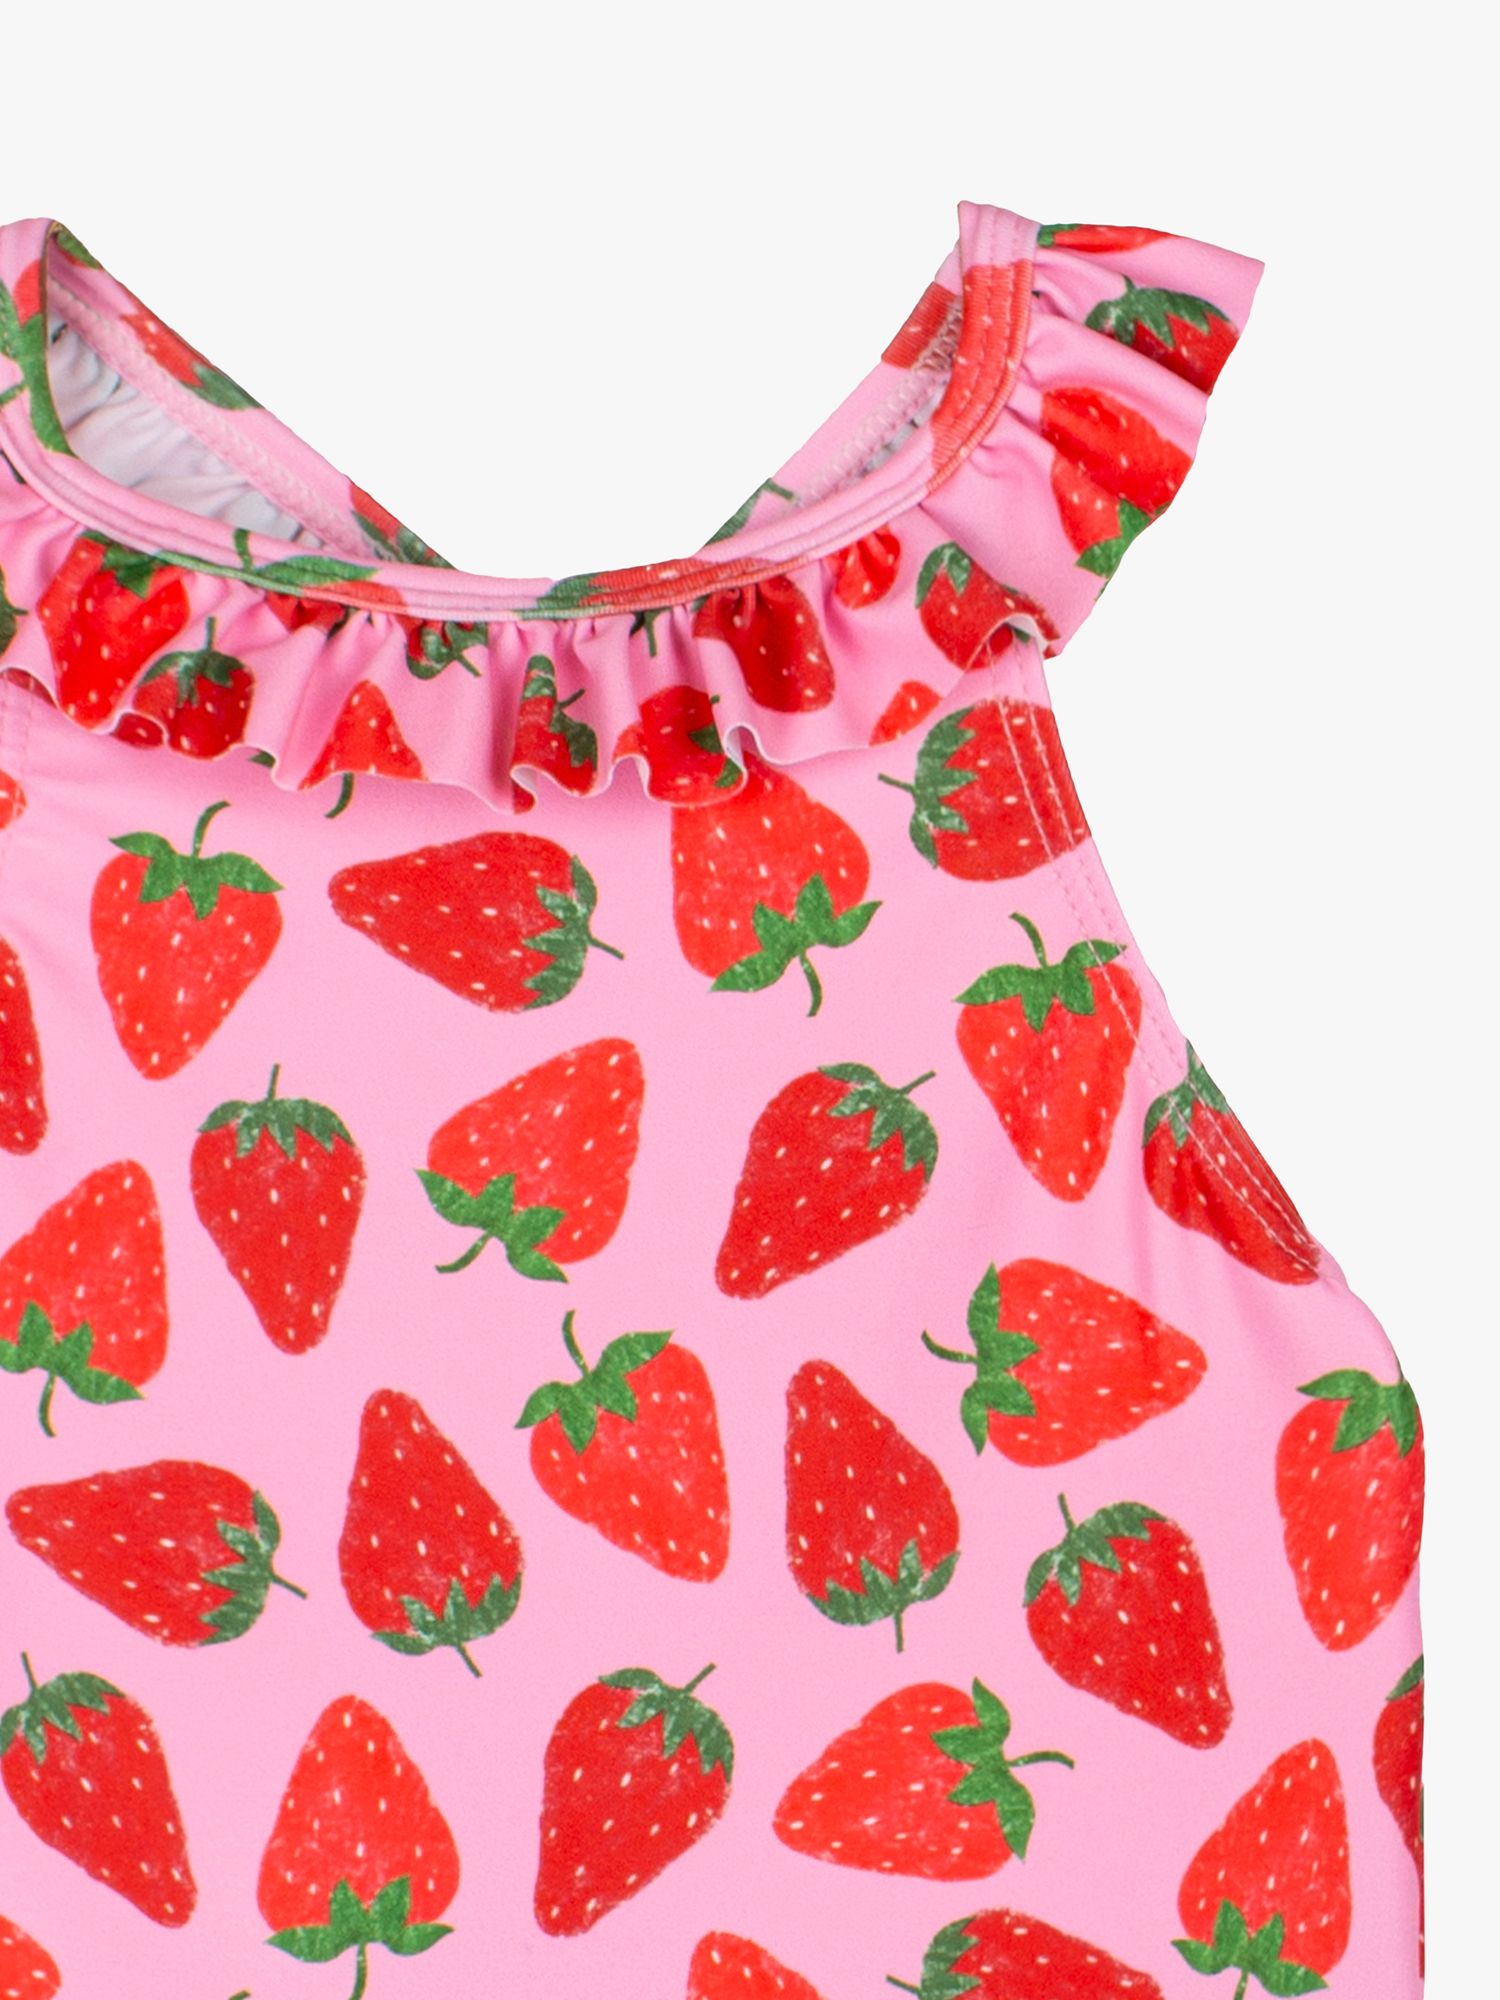 Trotters Baby Strawberry Print Frill Swimsuit, Pink/Strawberry, 3-6 months